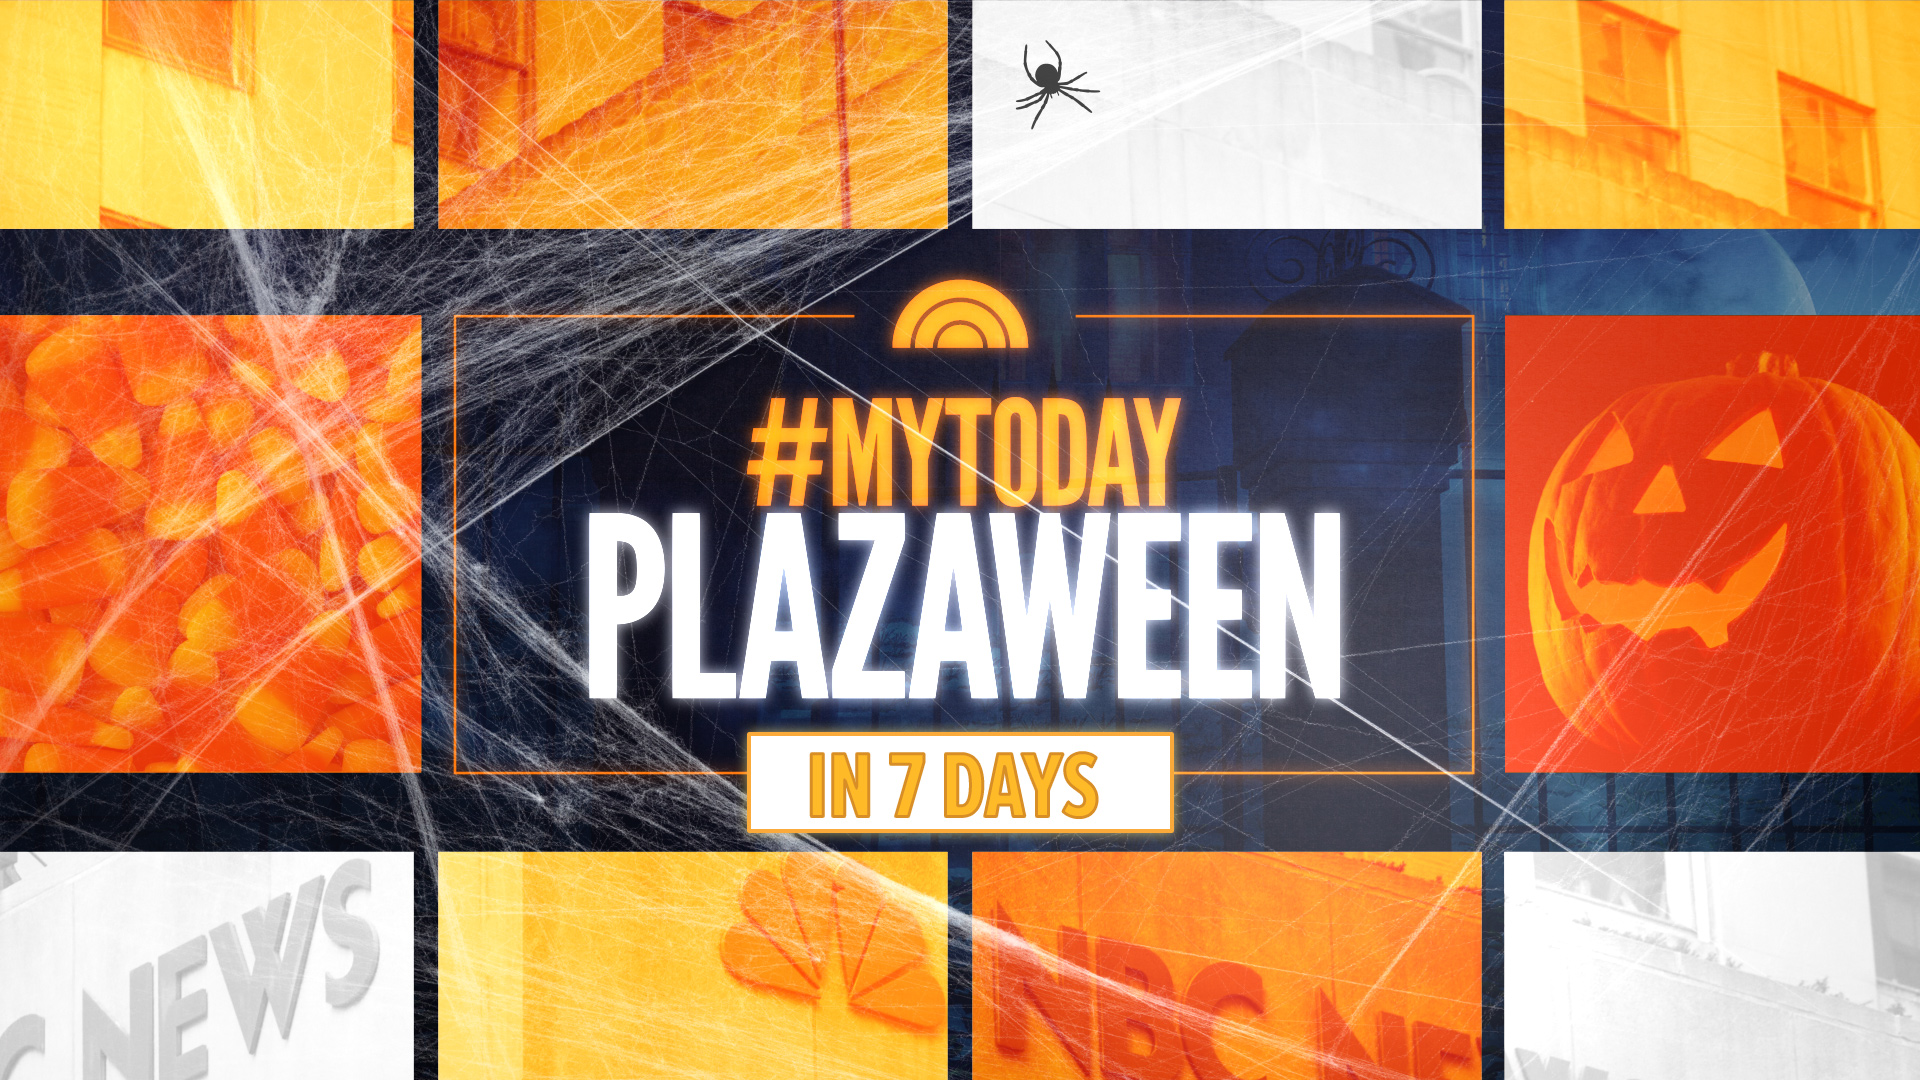 How to be a part of the ‘Today’ show’s Halloween plans